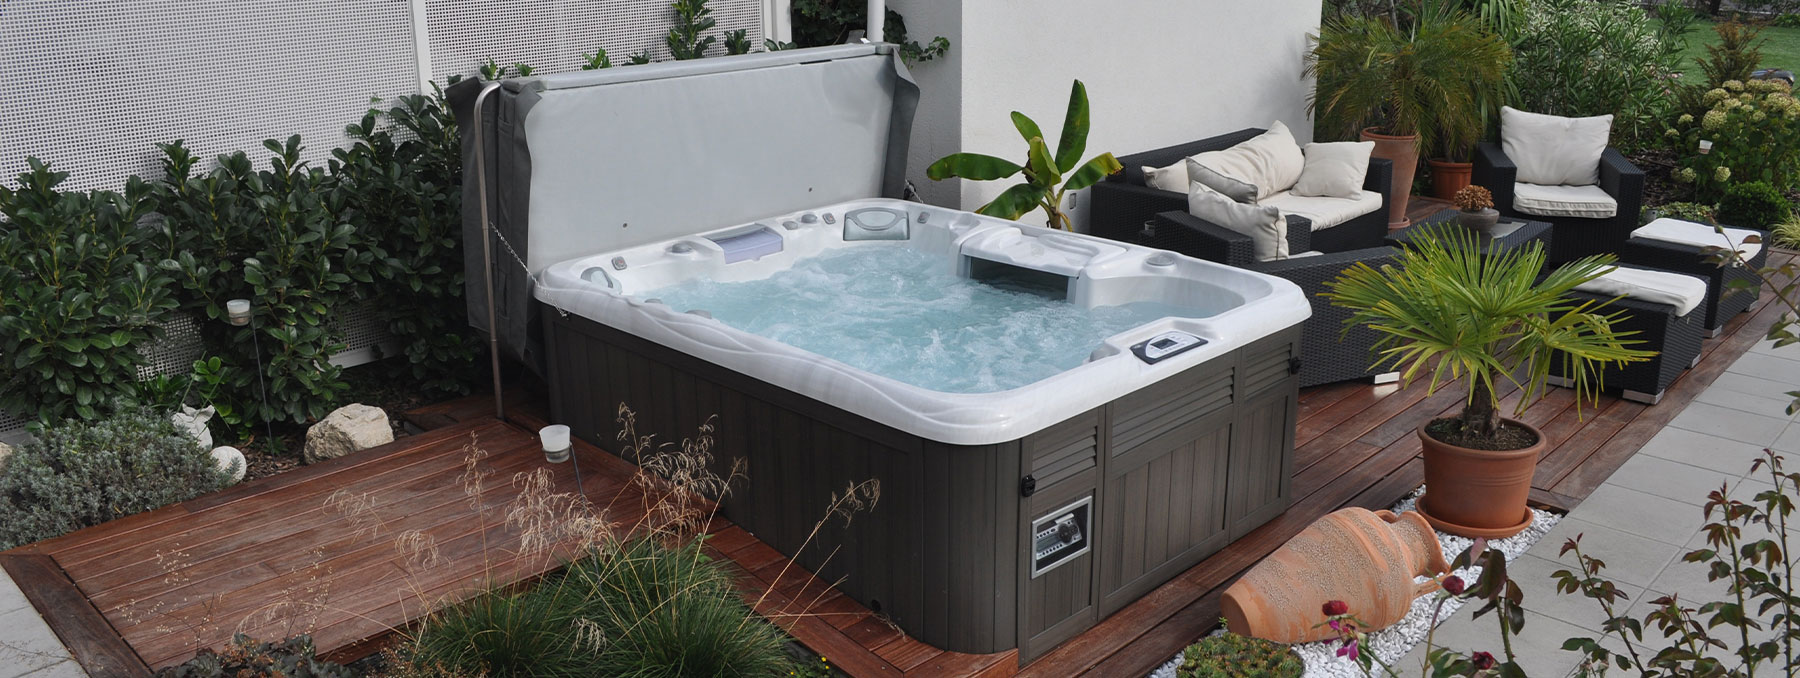 Hot Tub Learning Resource Center For Owners